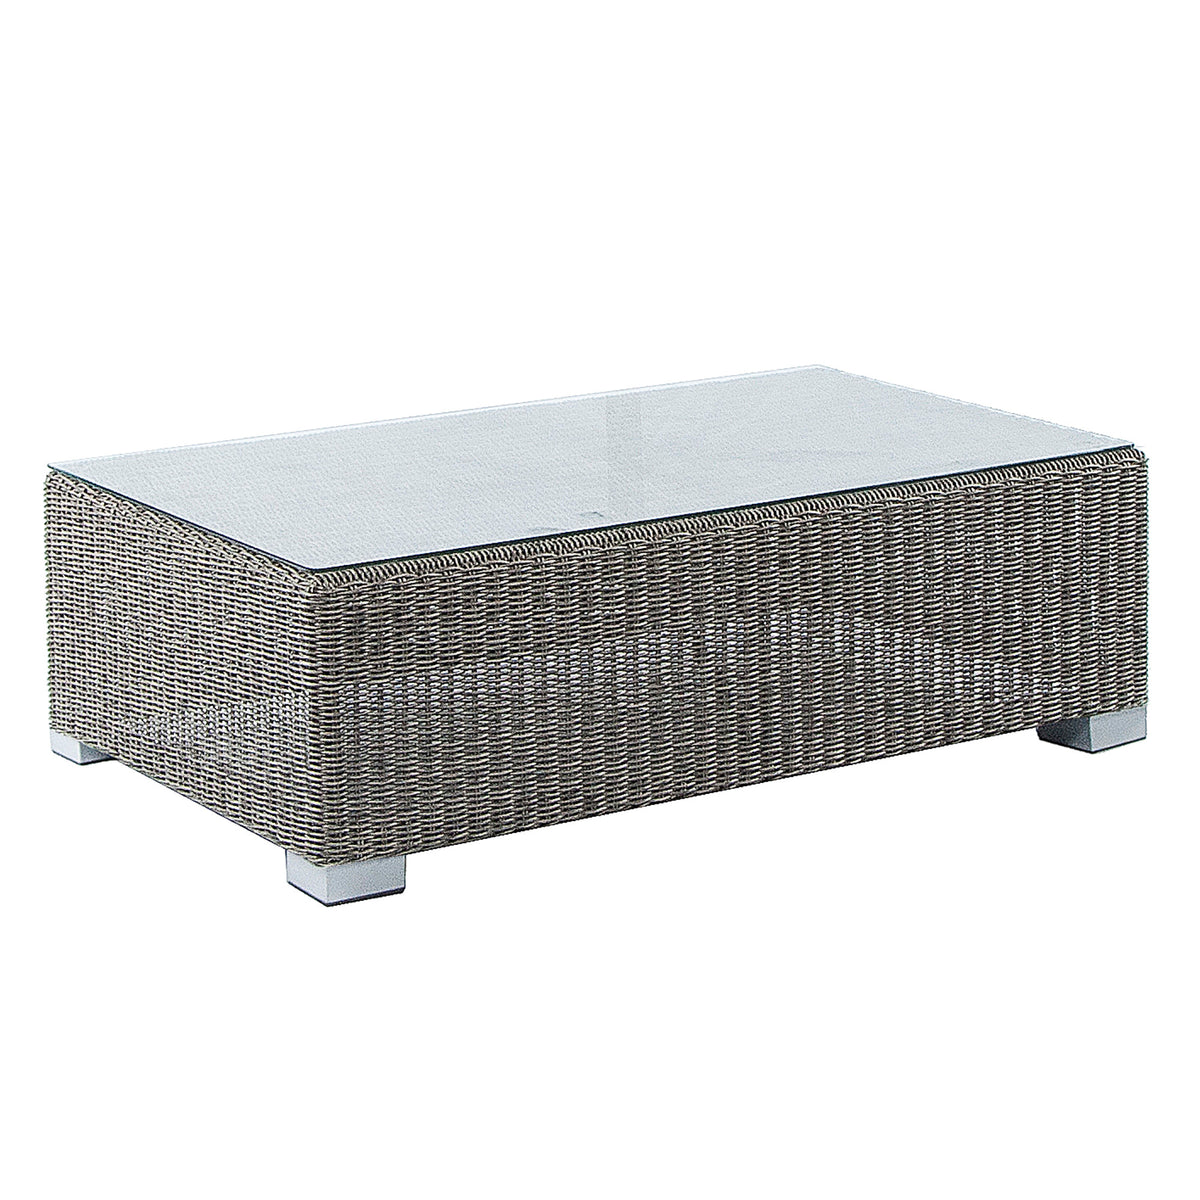 Alexander Rose Monte Carlo Rectangular Coffee Table with Glass Top